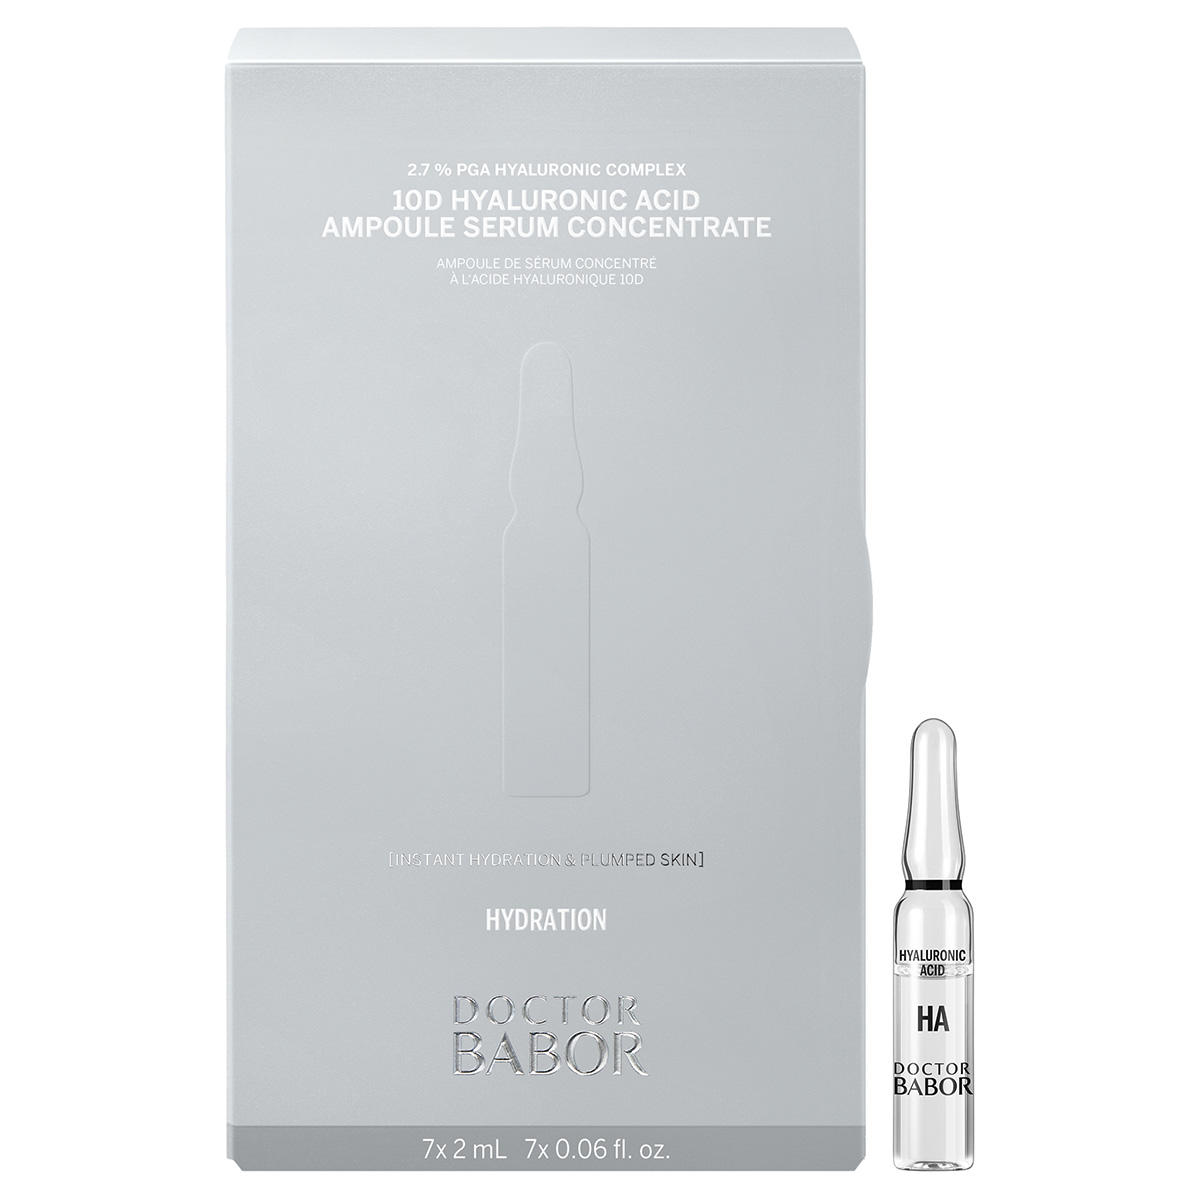 BABOR DOCTOR BABOR HYDRATION 10D HYALURONIC ACID AMPOULE SERUM CONCENTRATE 7 x 2 ml - 2